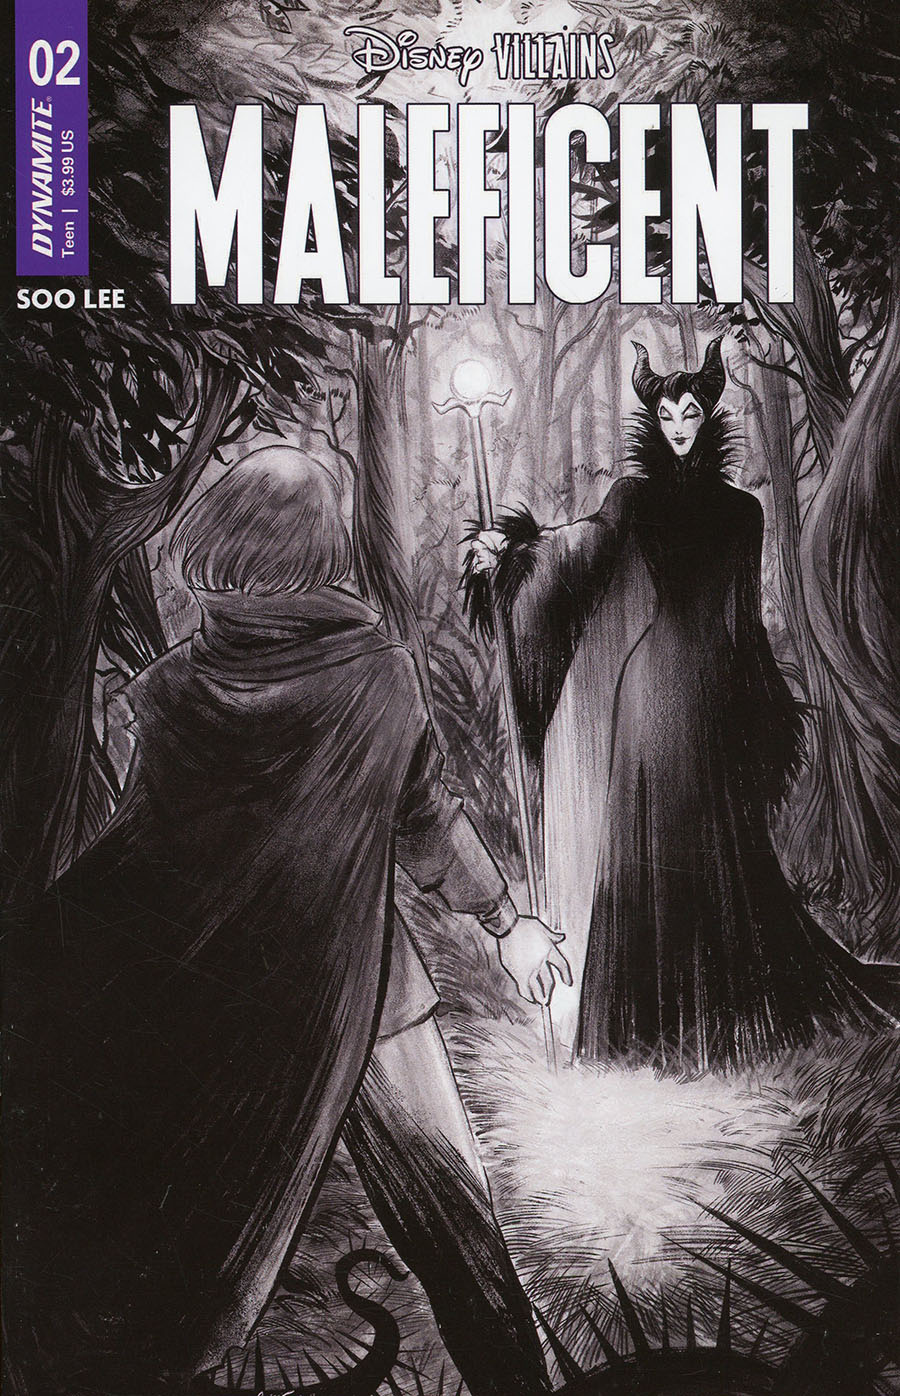 Disney Villains Maleficent #2 Cover F Incentive Soo Lee Line Art Cover